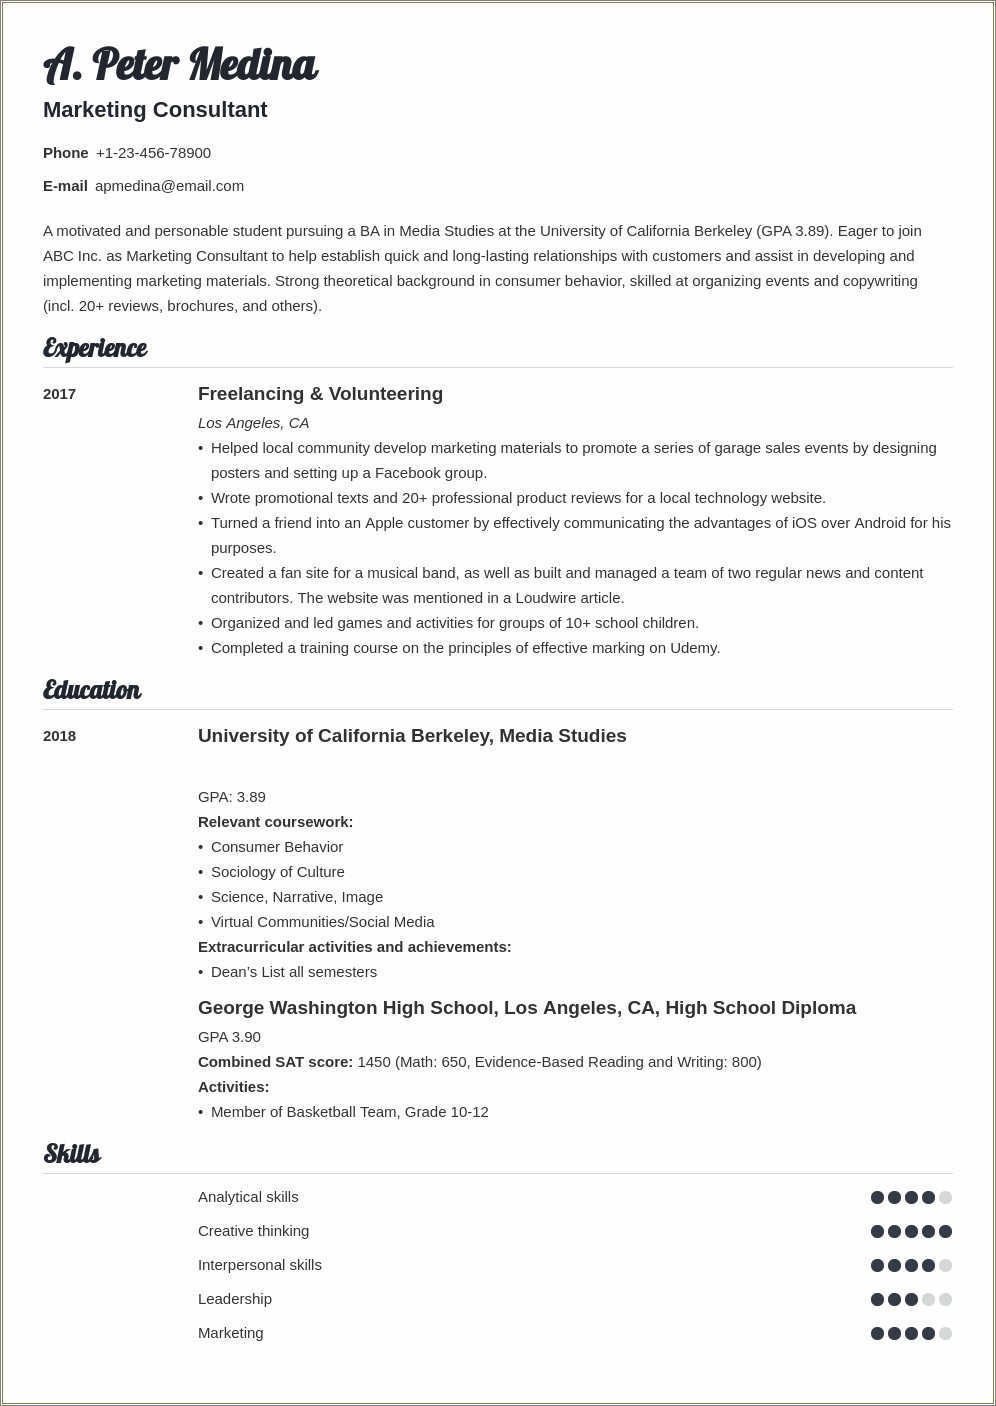 Sample Resume For Fresh Graduate With Ojt Experience